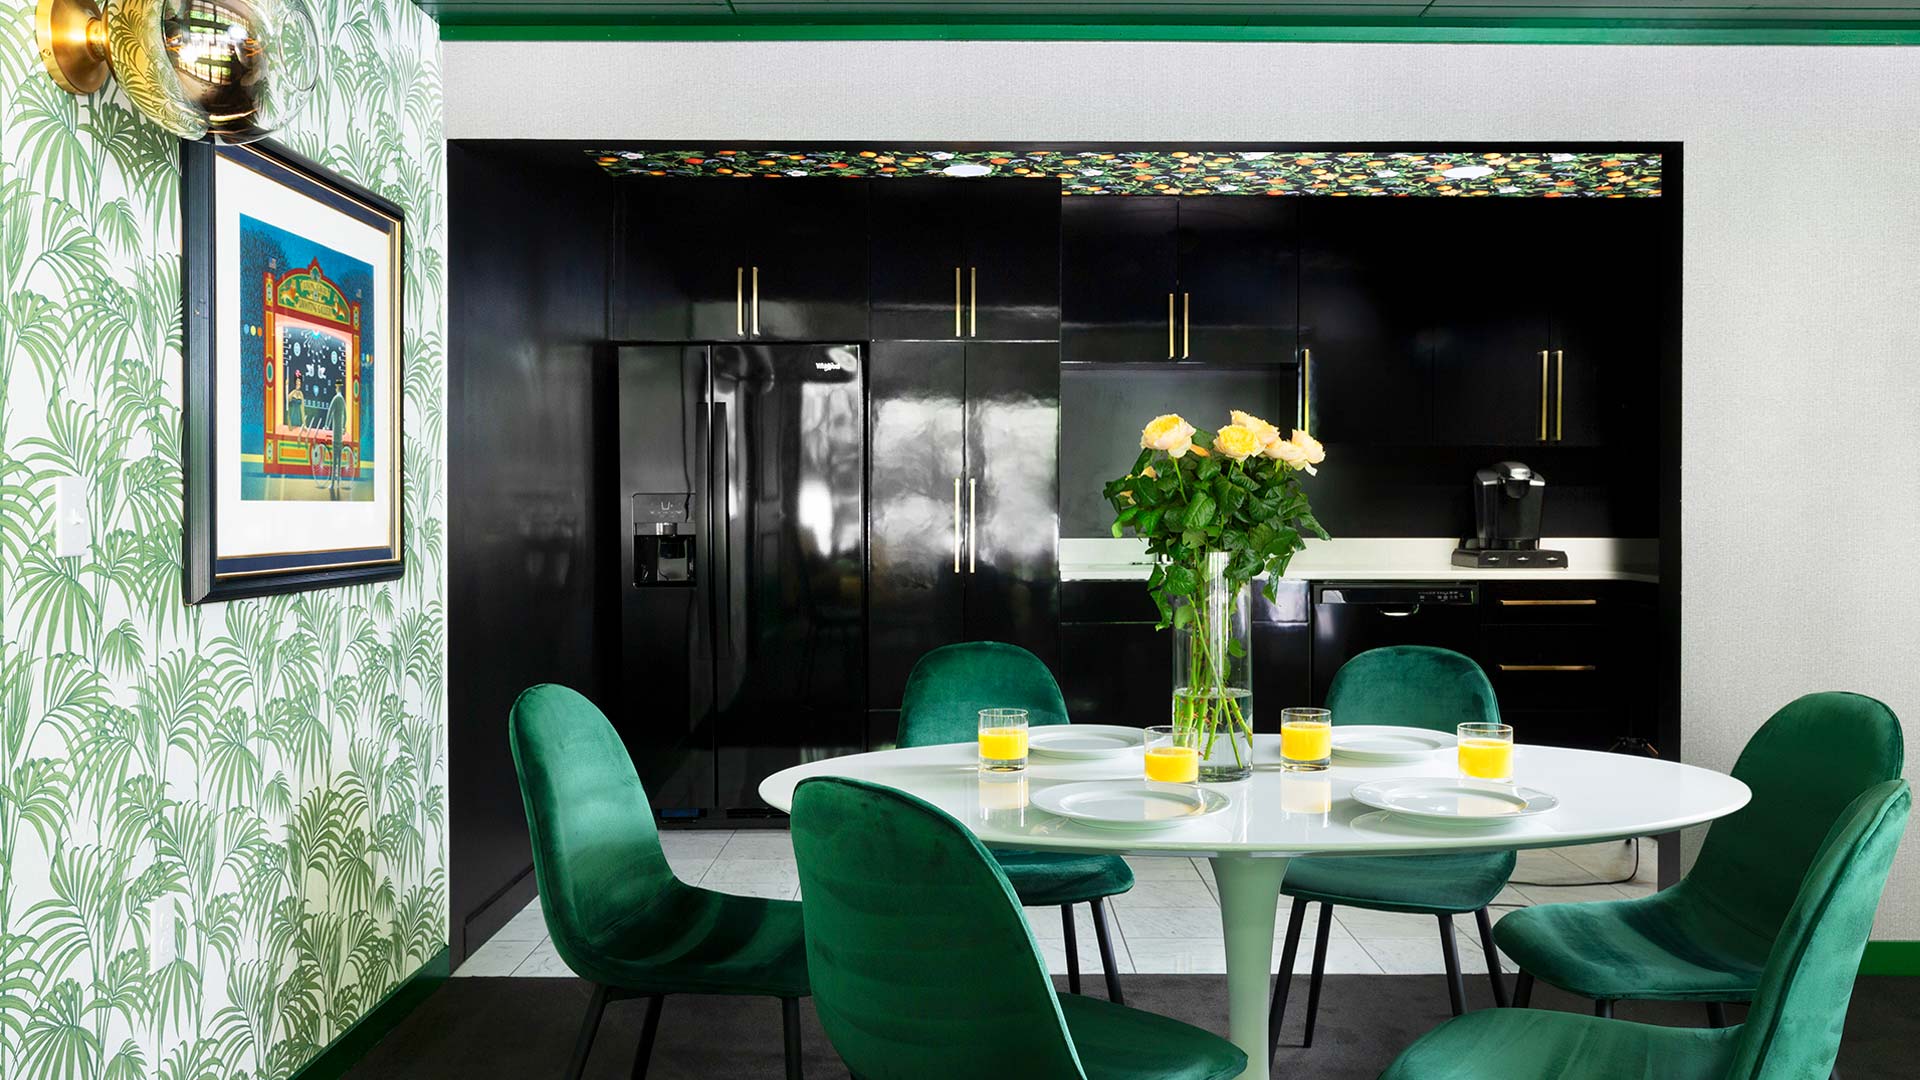 an interior shot of the dining area. There is a large circulat table with glasswear and a floral centerpiece with emerald green chairs surrounding it. In the background is the kitchen.